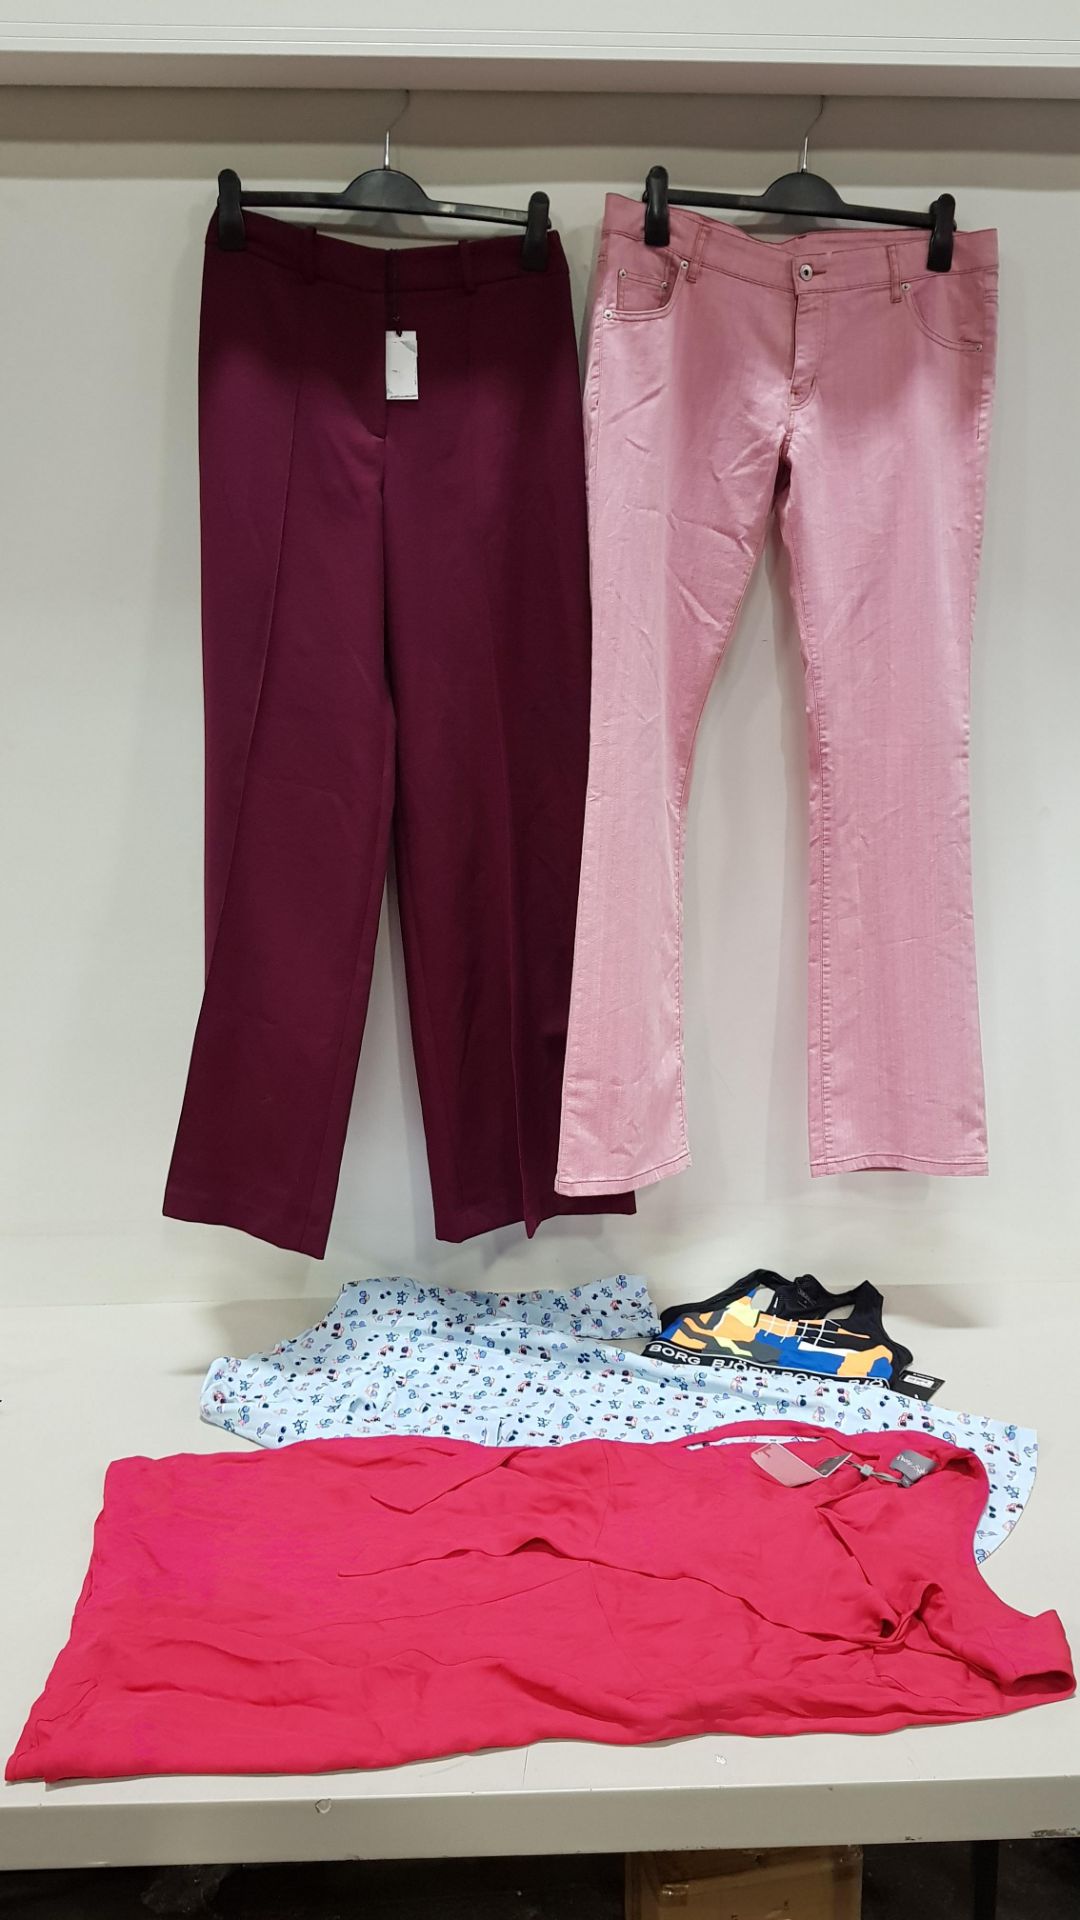 6 PIECE MIXED CLOTHING LOT CONTAINING MILLY TROUSERS SIZE 8, BJORN BORG SPORTS BRA SIZE 12,